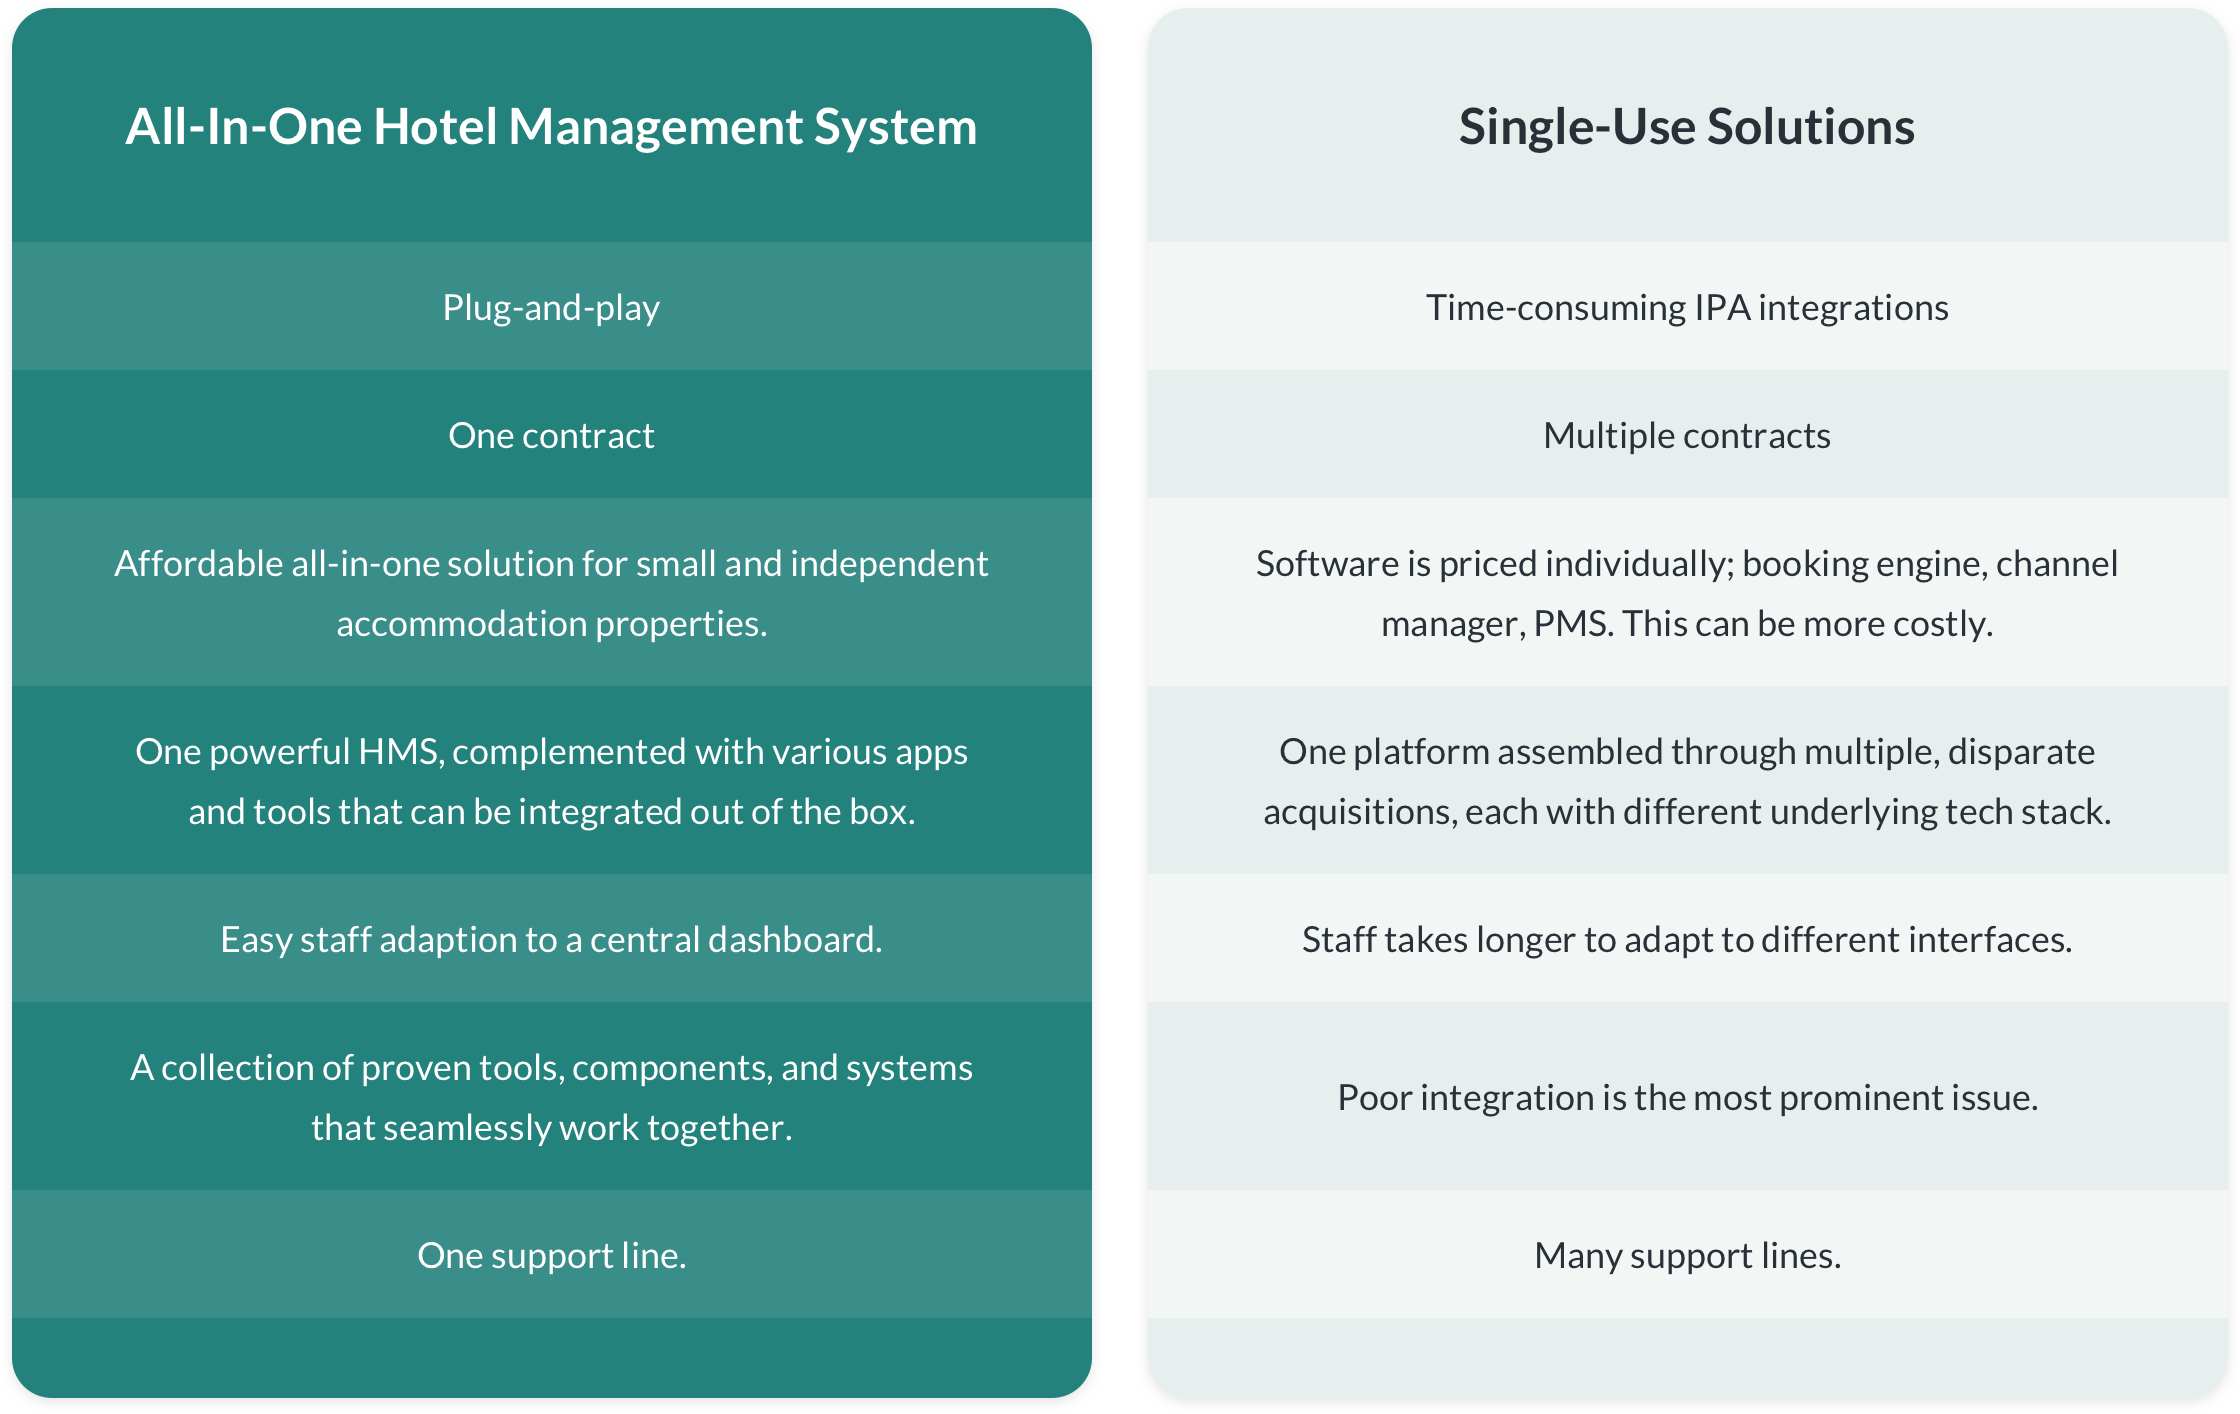 all-in-one-hotel-management-system vs single use system 